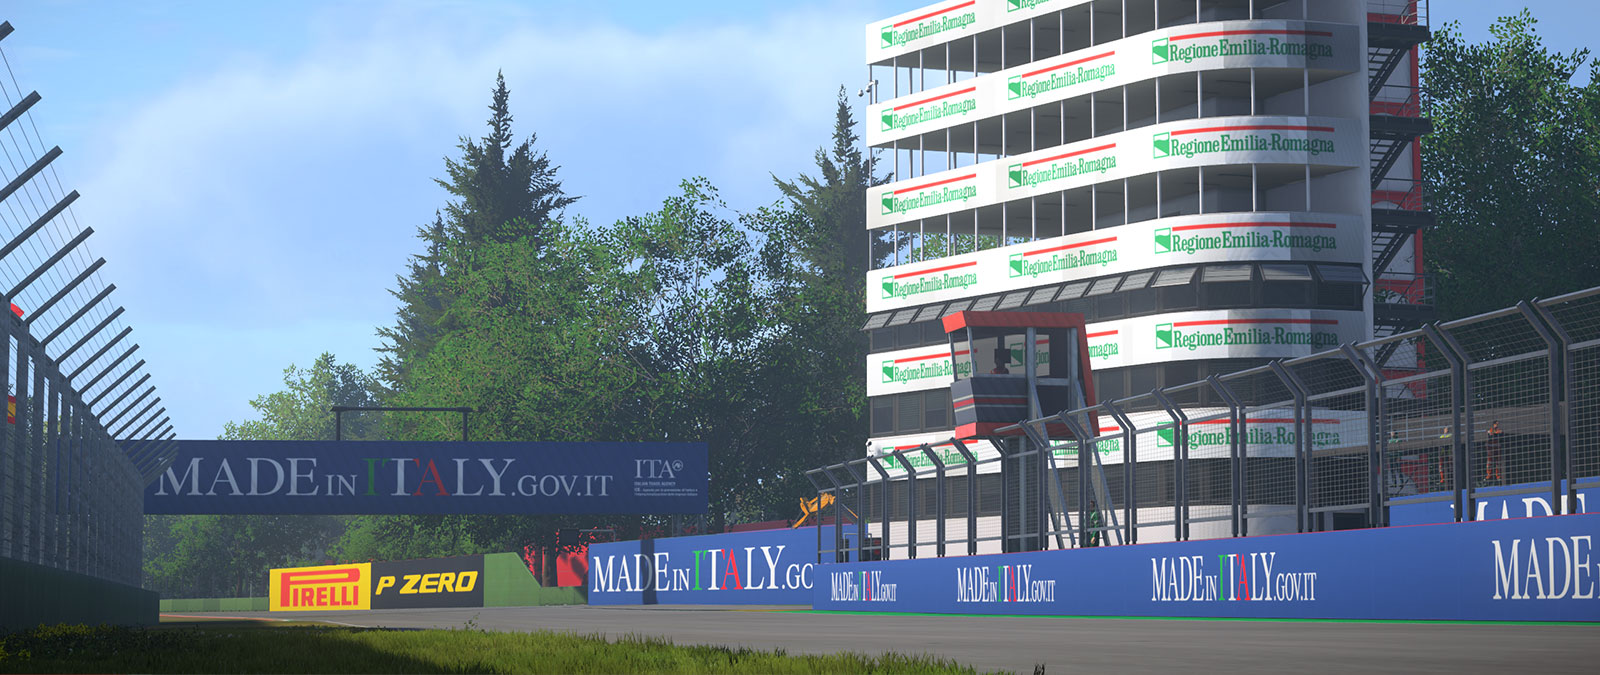 Imola racetrack with a building with many balconies above a Made In Italy sponsored wall